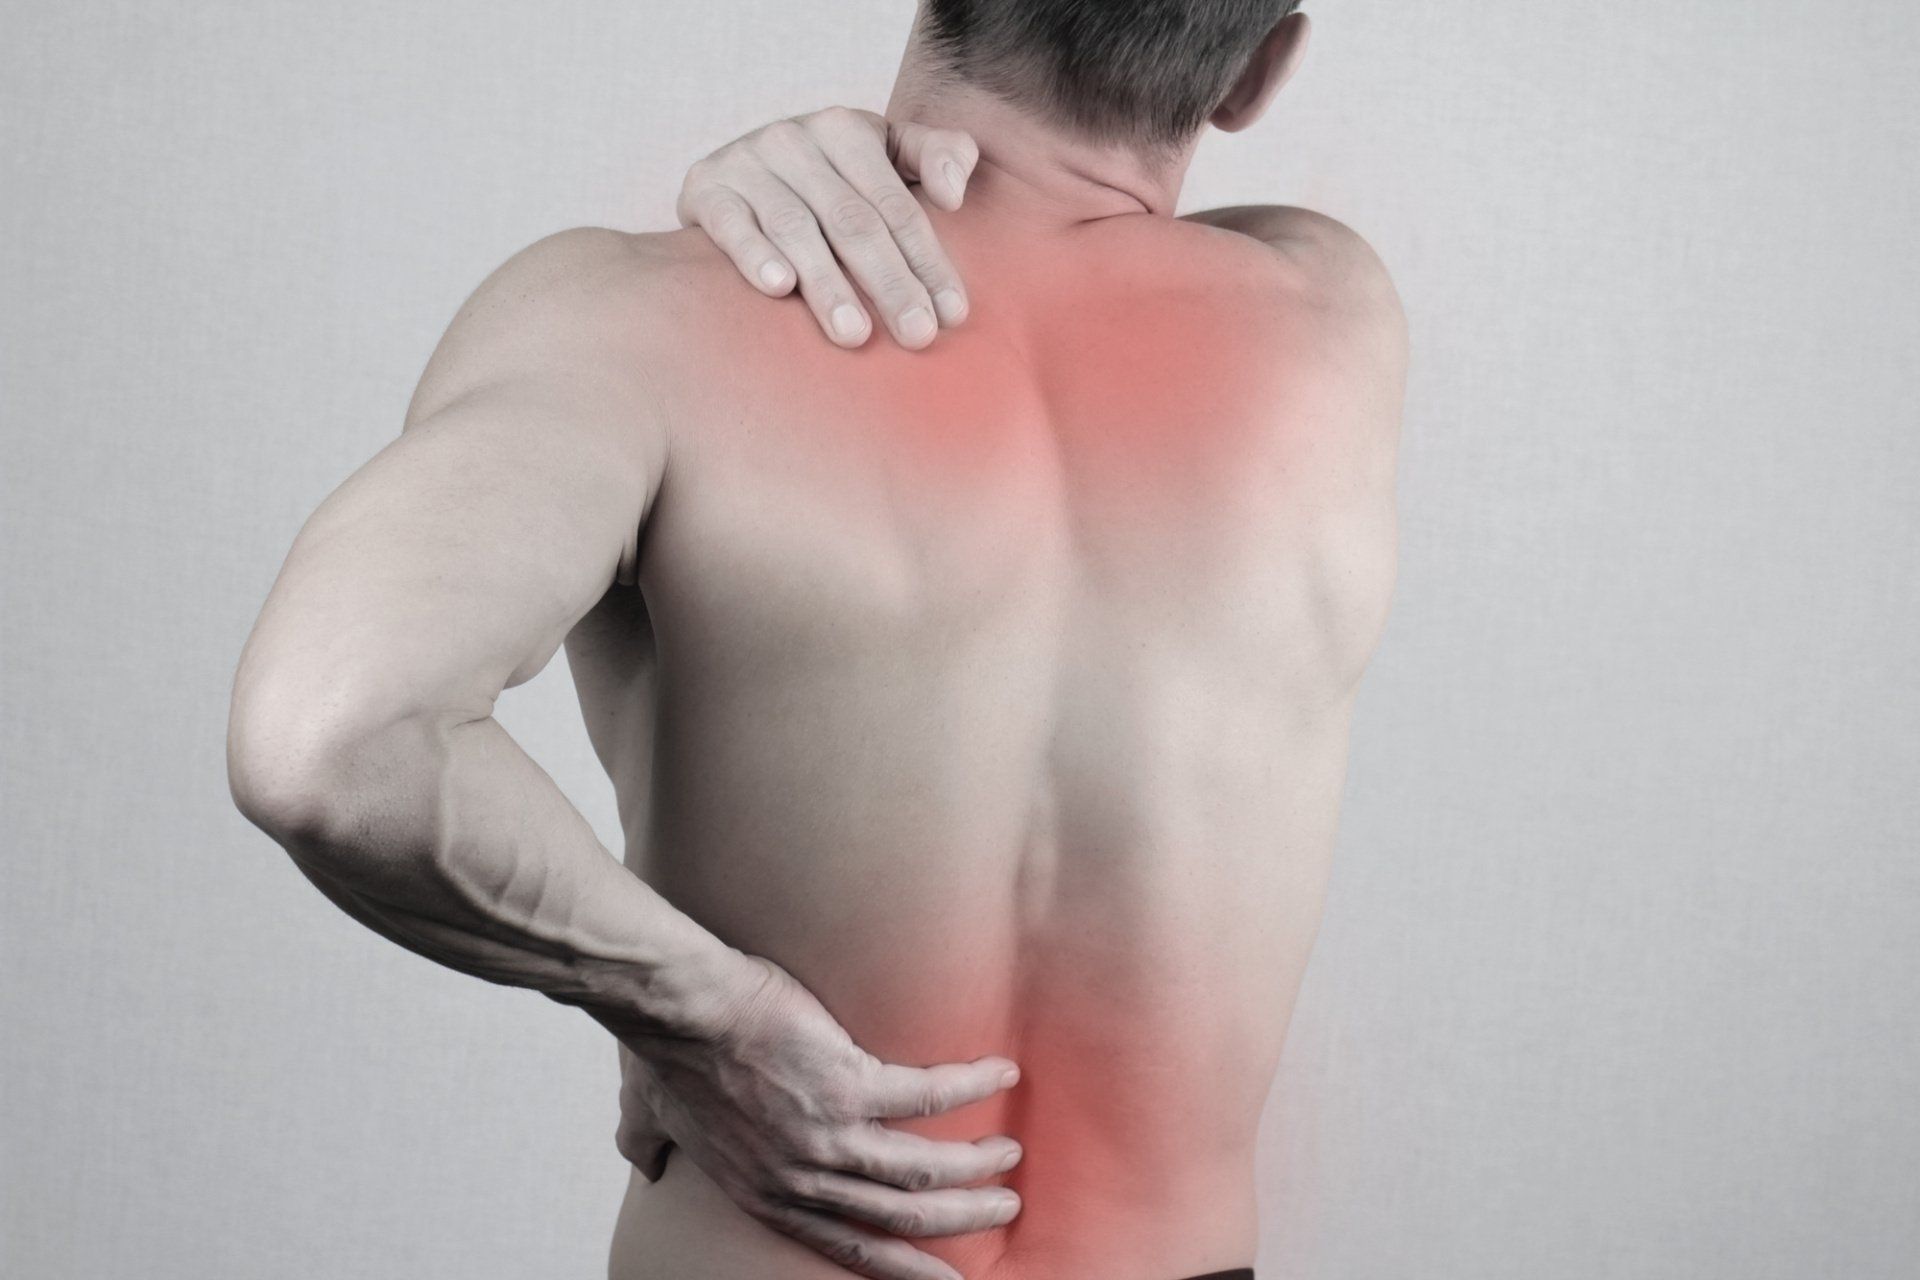 6 Things That Can Be Treated by Advanced Chiropractic Care